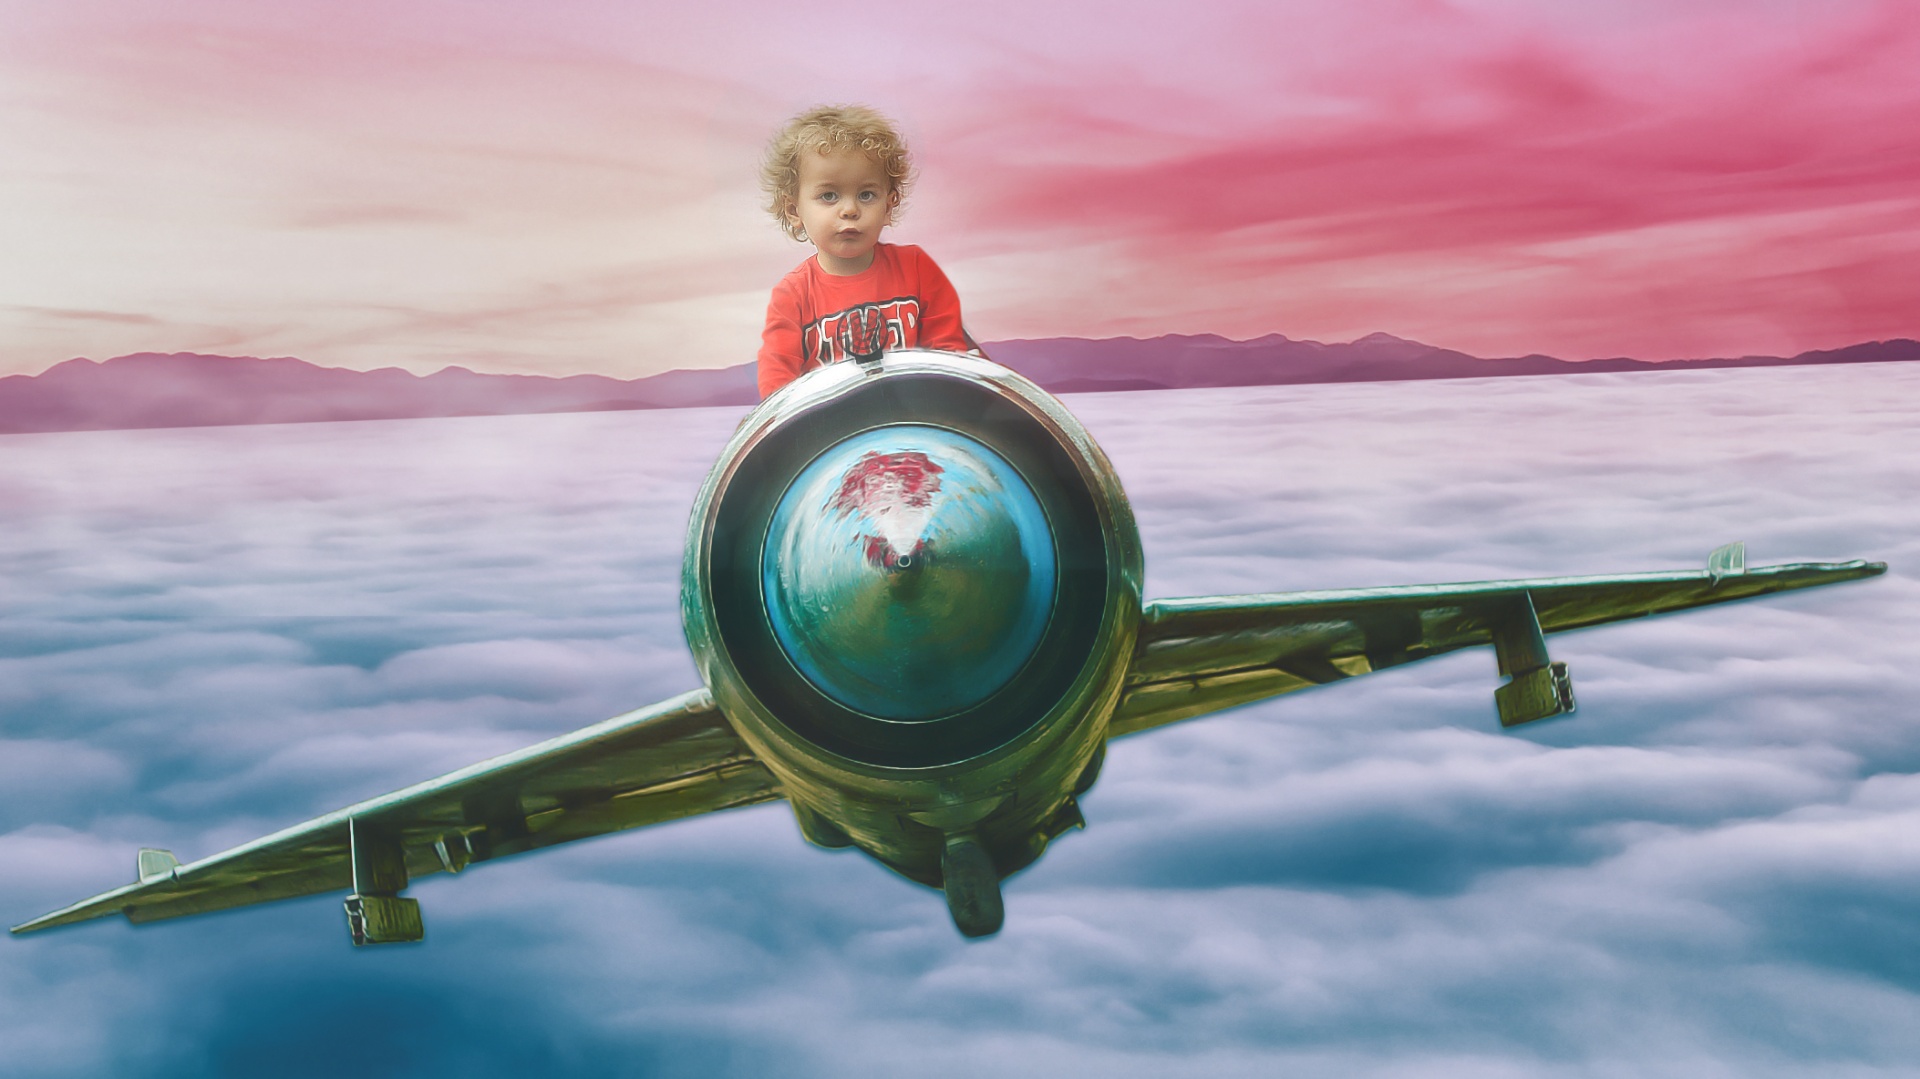 Child controls airplane in the sky